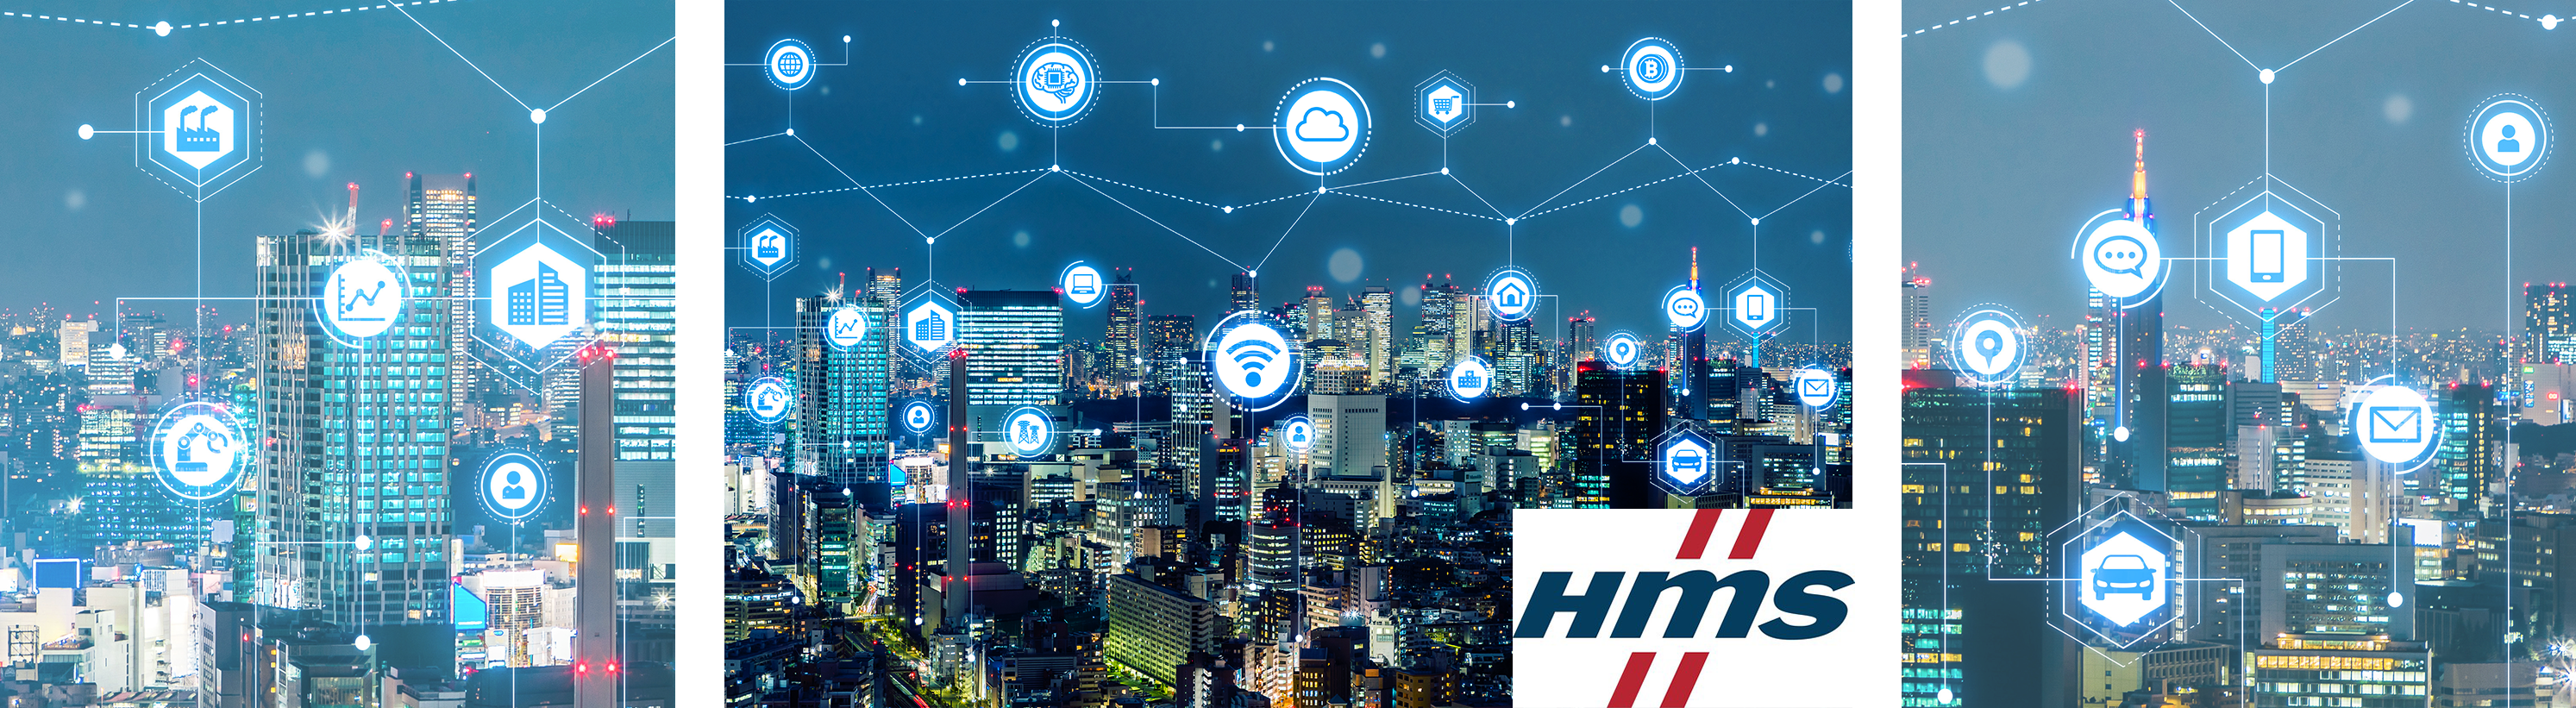 Growing the Connectivity market sector with HMS Networks